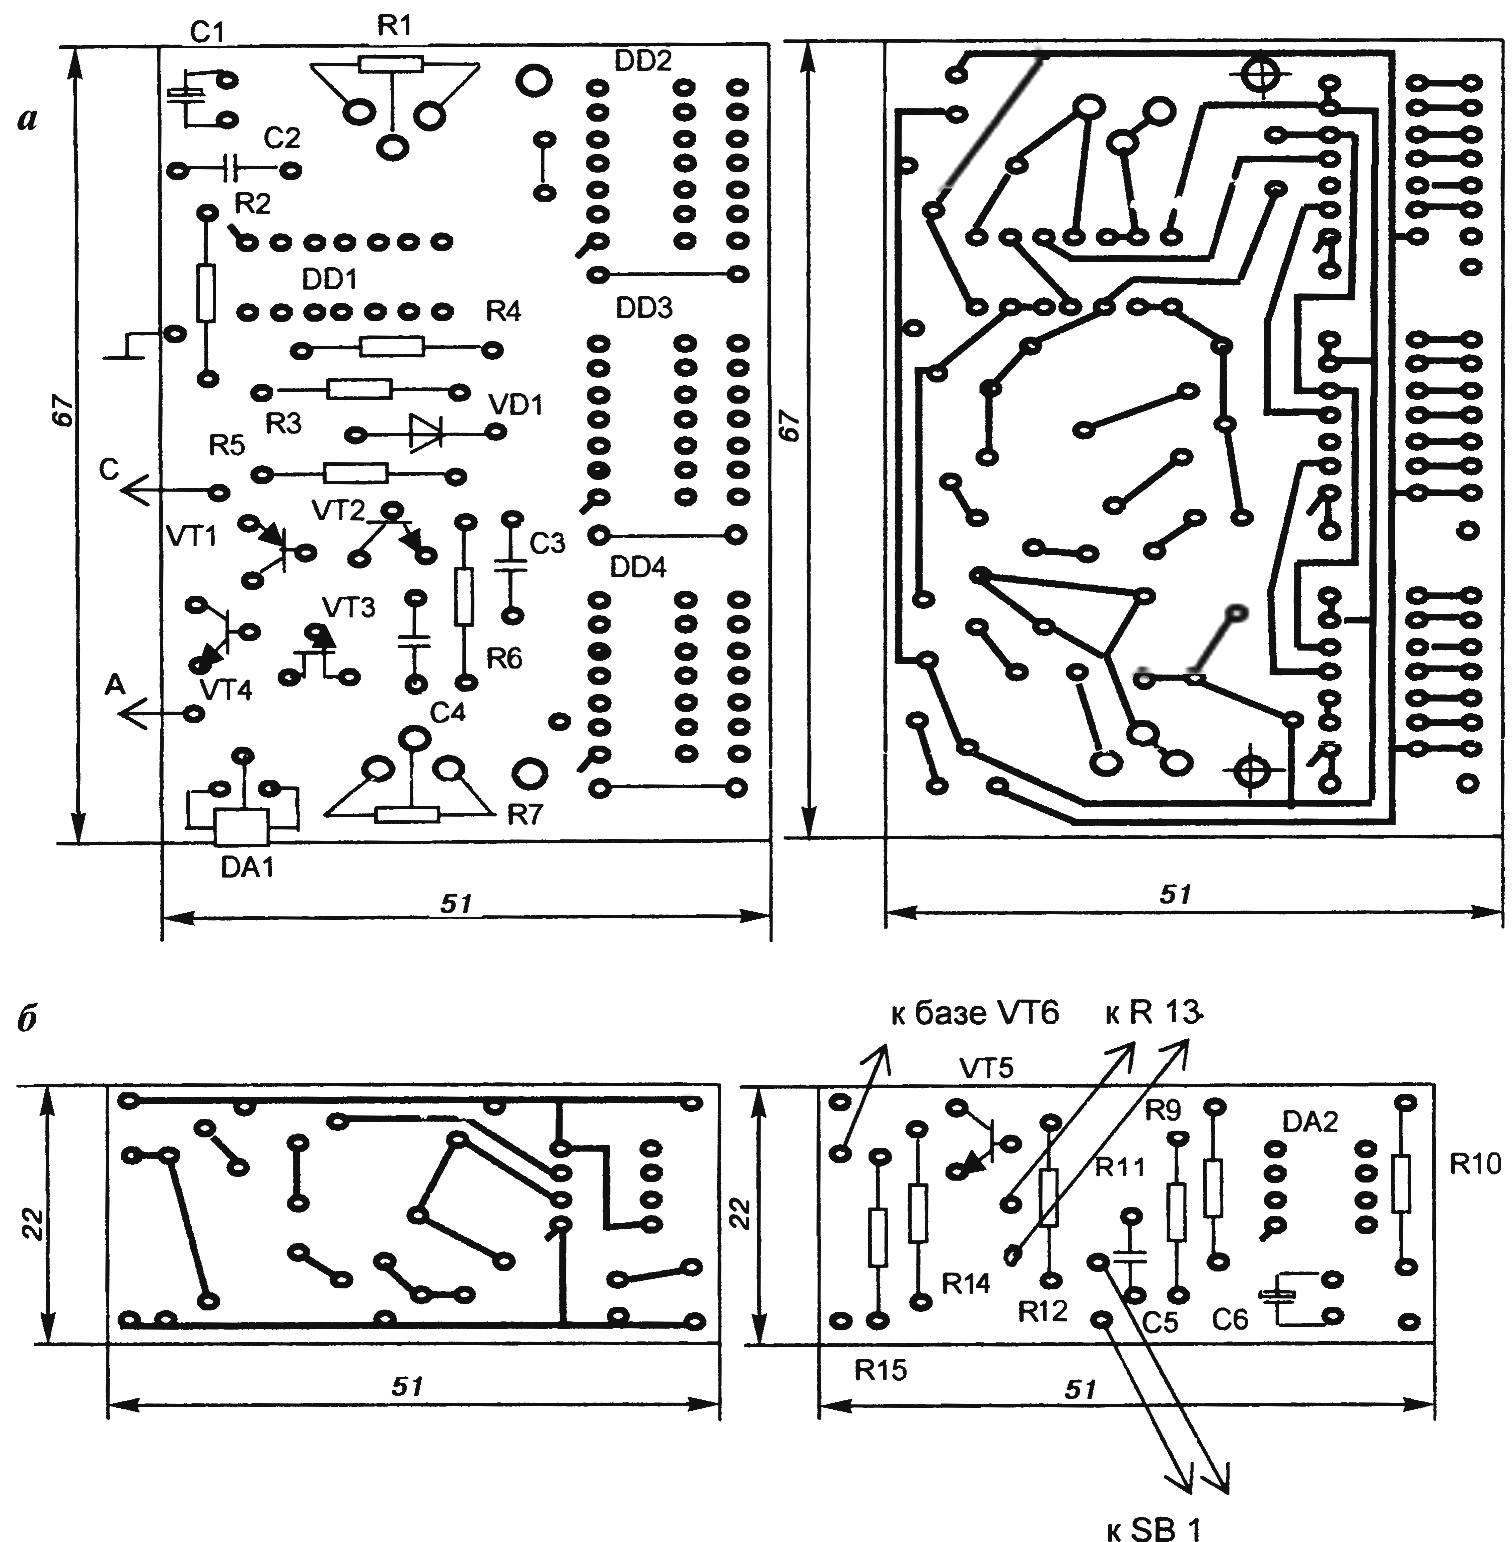 Topology of printed circuit boards and location details when installing the voltmeter (a) and active load (b)